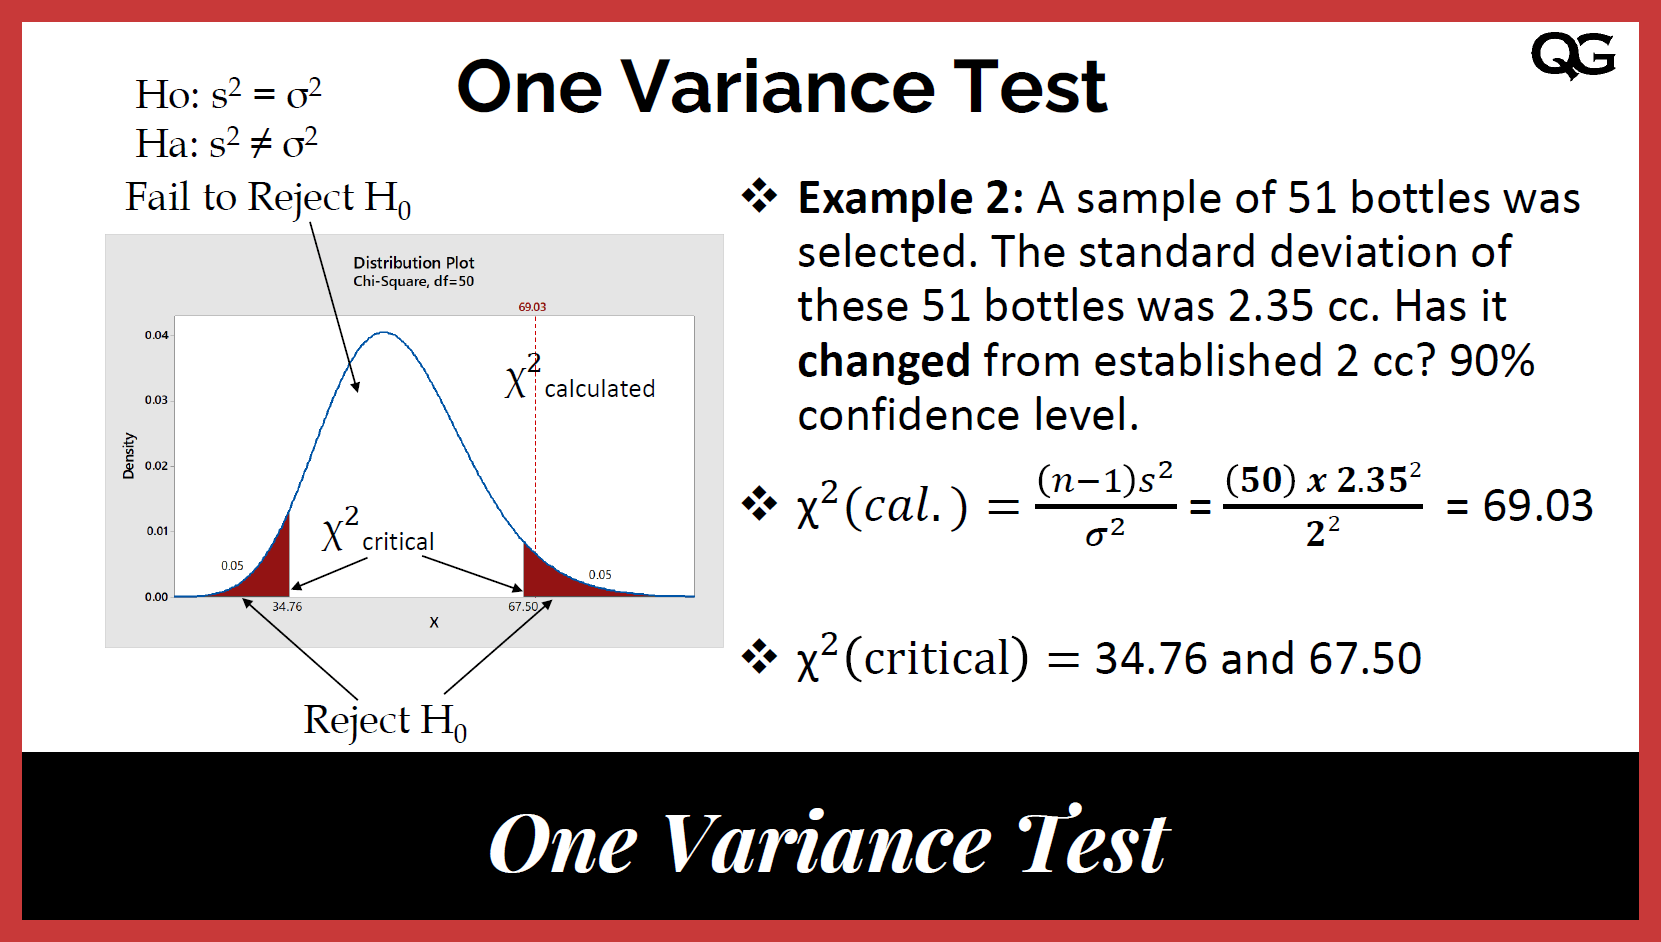 hypothesis test on variance